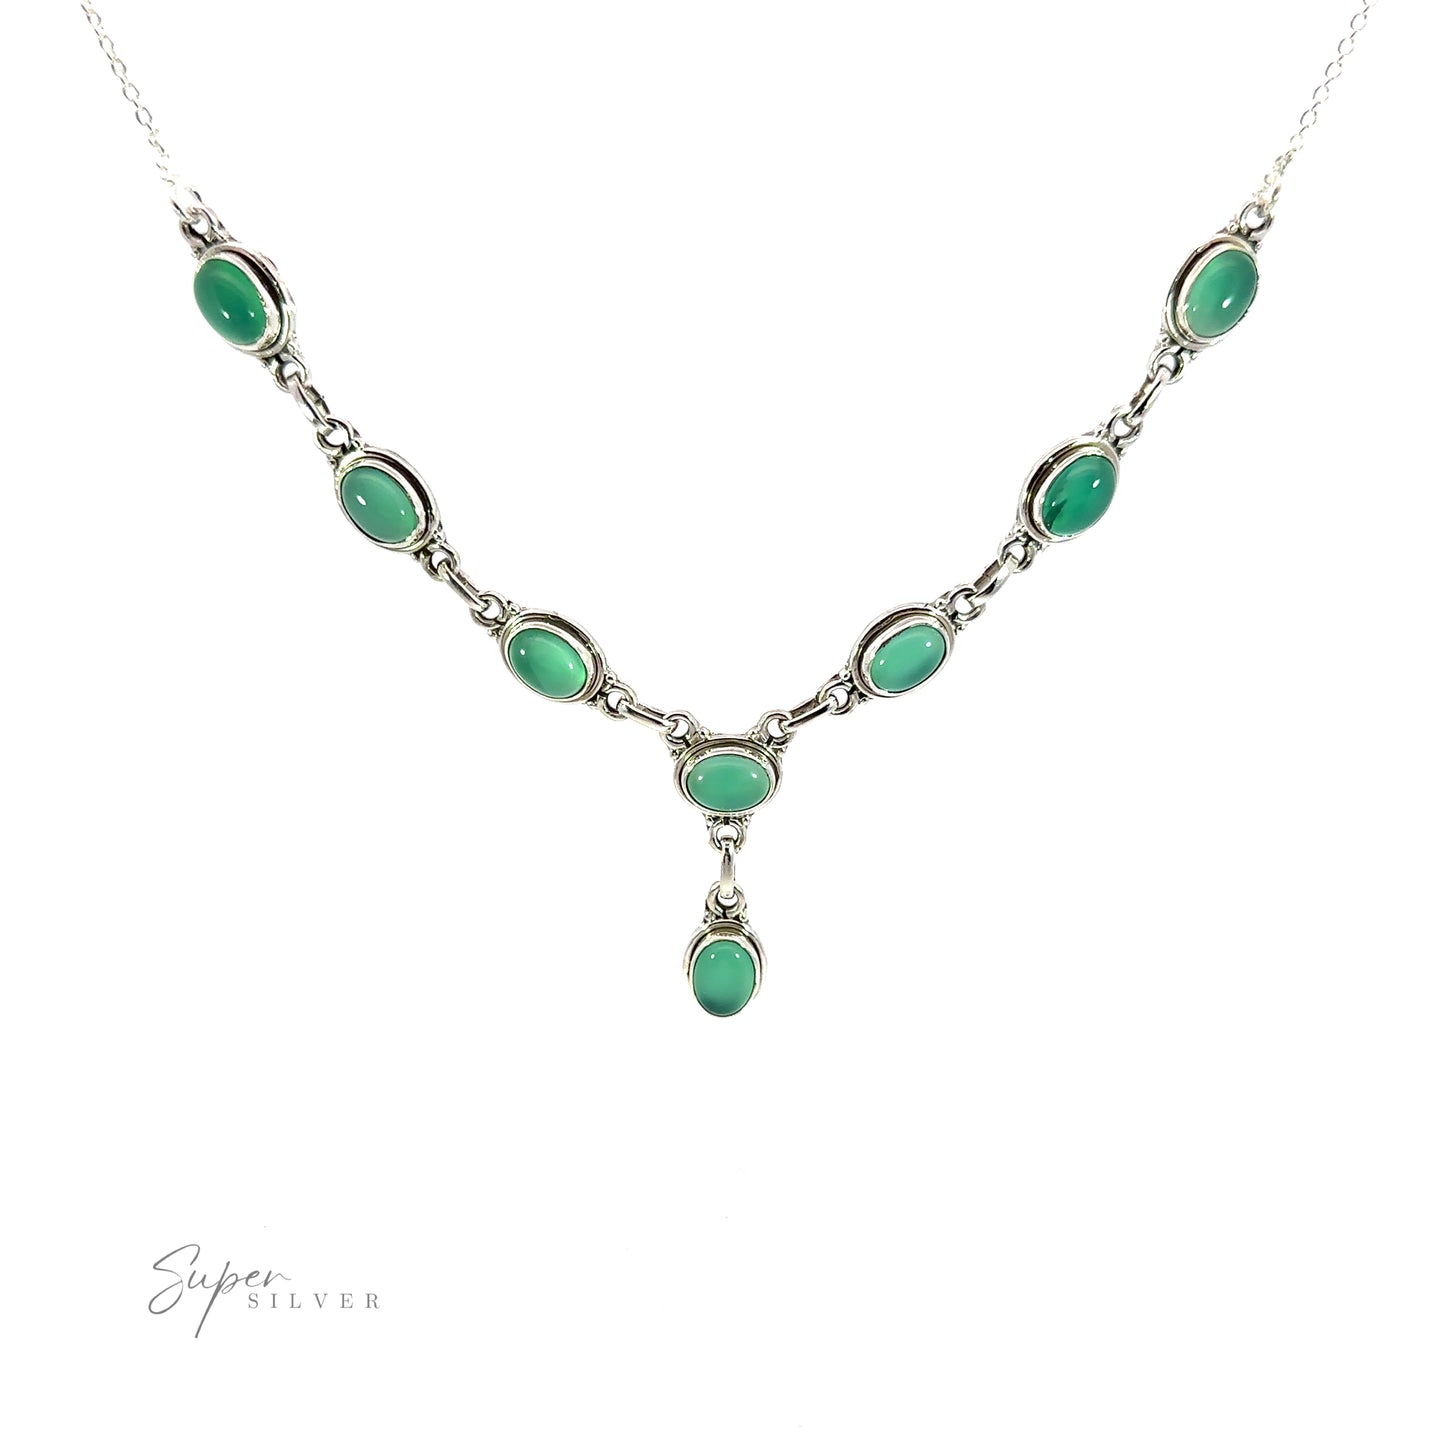 
                  
                    A silver Simple Oval Y Necklace with Gemstones featuring eight green oval gemstones evenly spaced along the chain with a single hanging green oval stone in the center. The "Super Silver" logo is on the bottom left corner, adding a touch of bohemian charm to this elegant piece.
                  
                